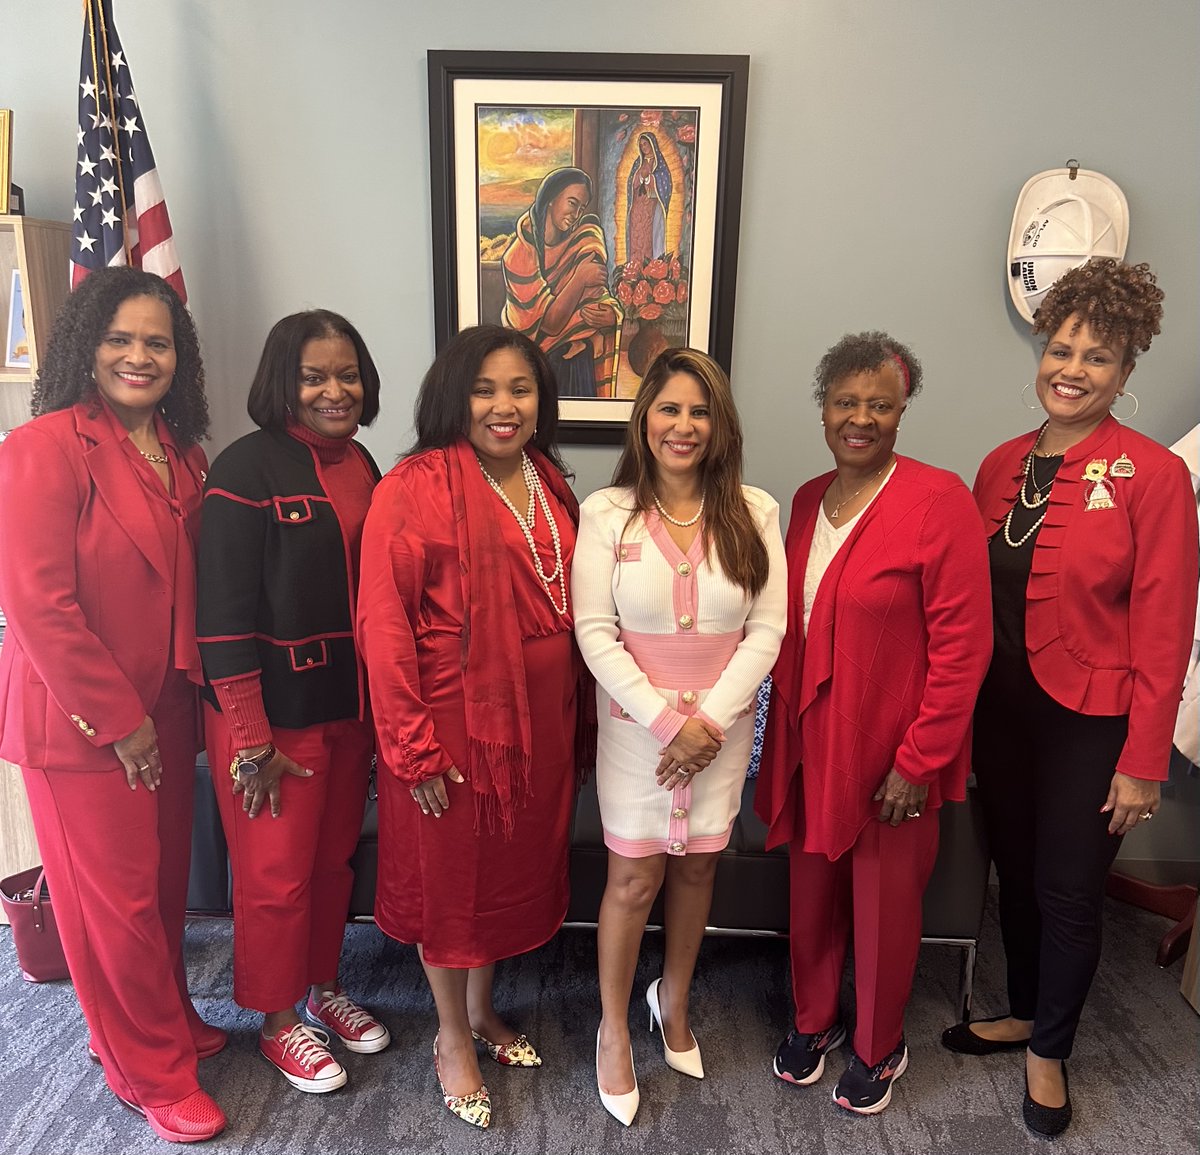 Thank you Delta Sigma Theta Sorority, Inc. for stopping by to say hi! It’s always wonderful to see constituents at the Capitol!